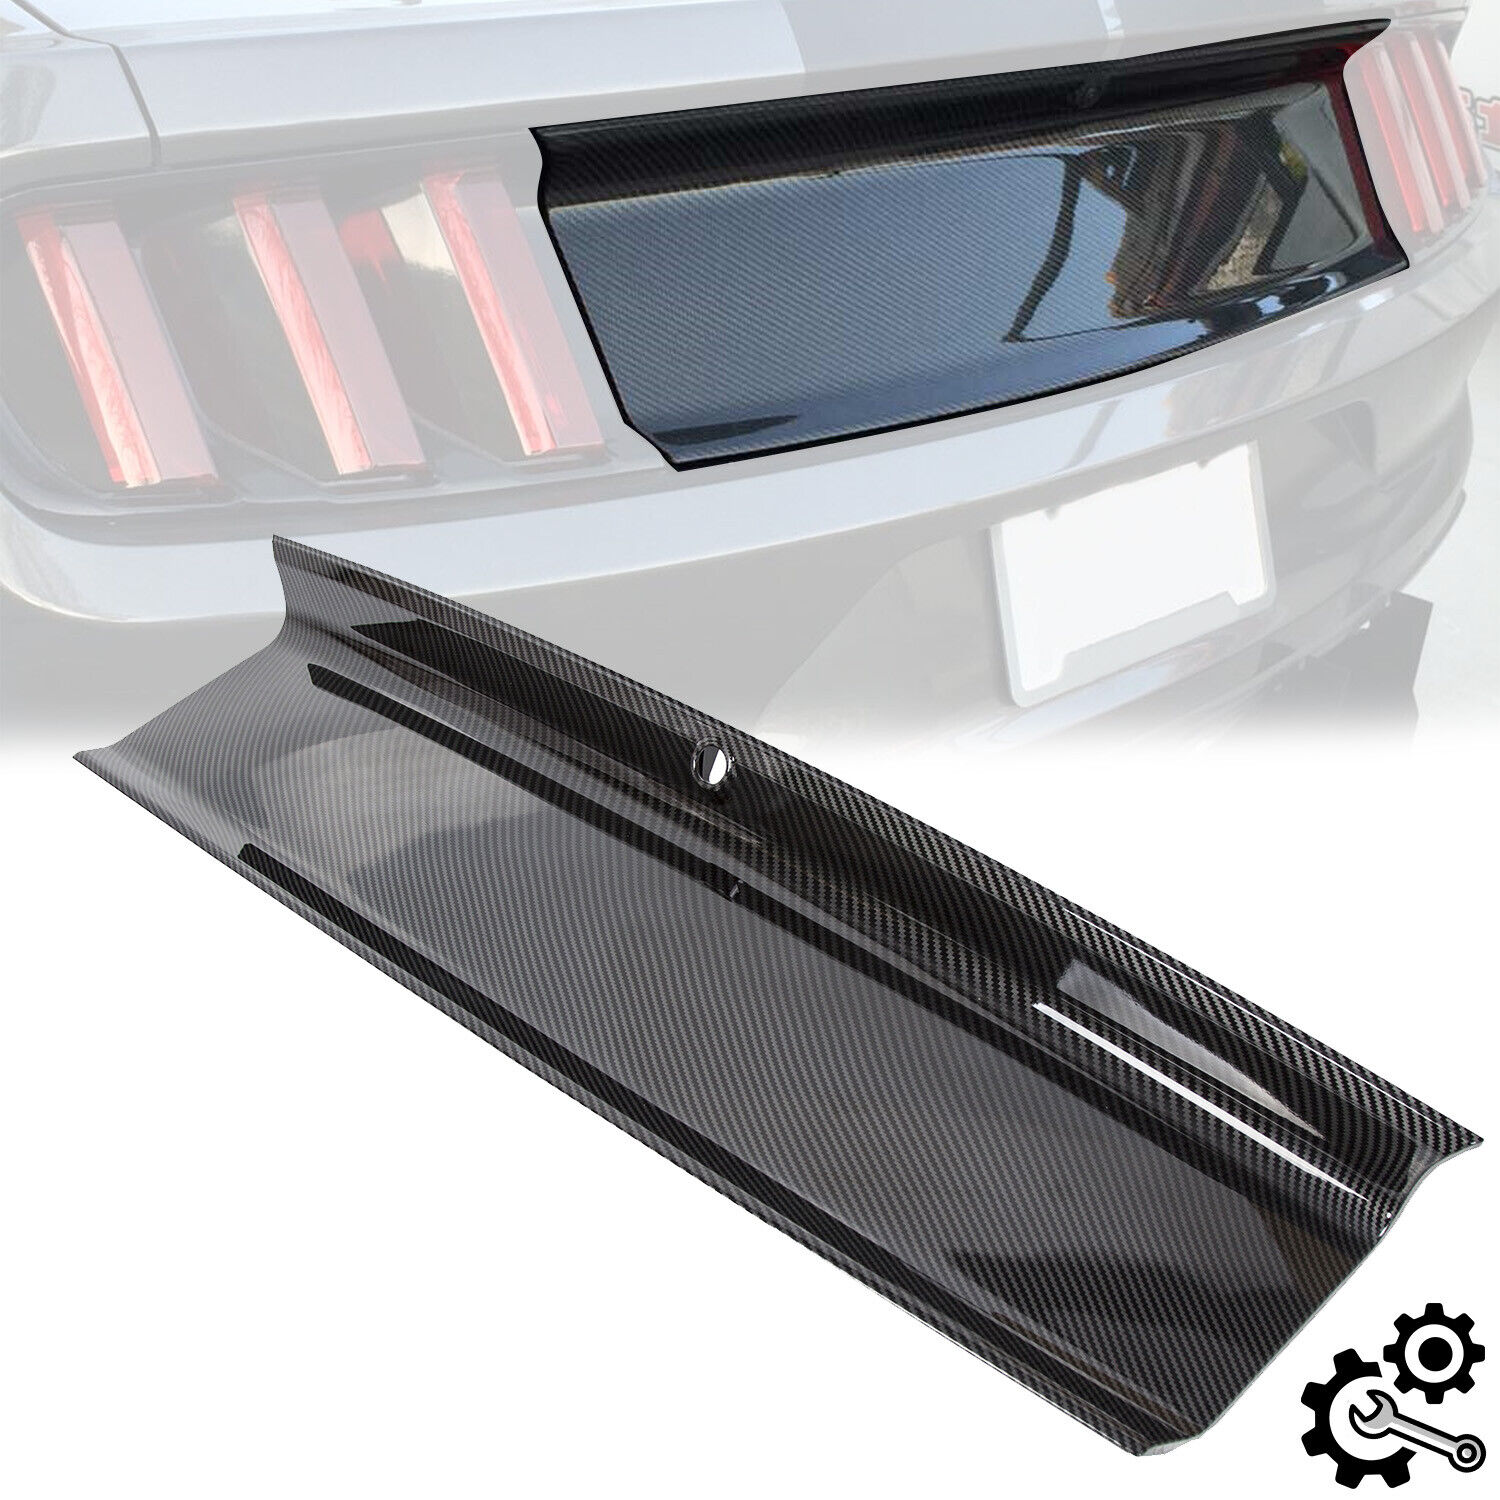 CARBON FIBER LOOK TRUNK PANEL DECKLID REAR TRIM COVER FOR 2015-2023 MUSTANG GT